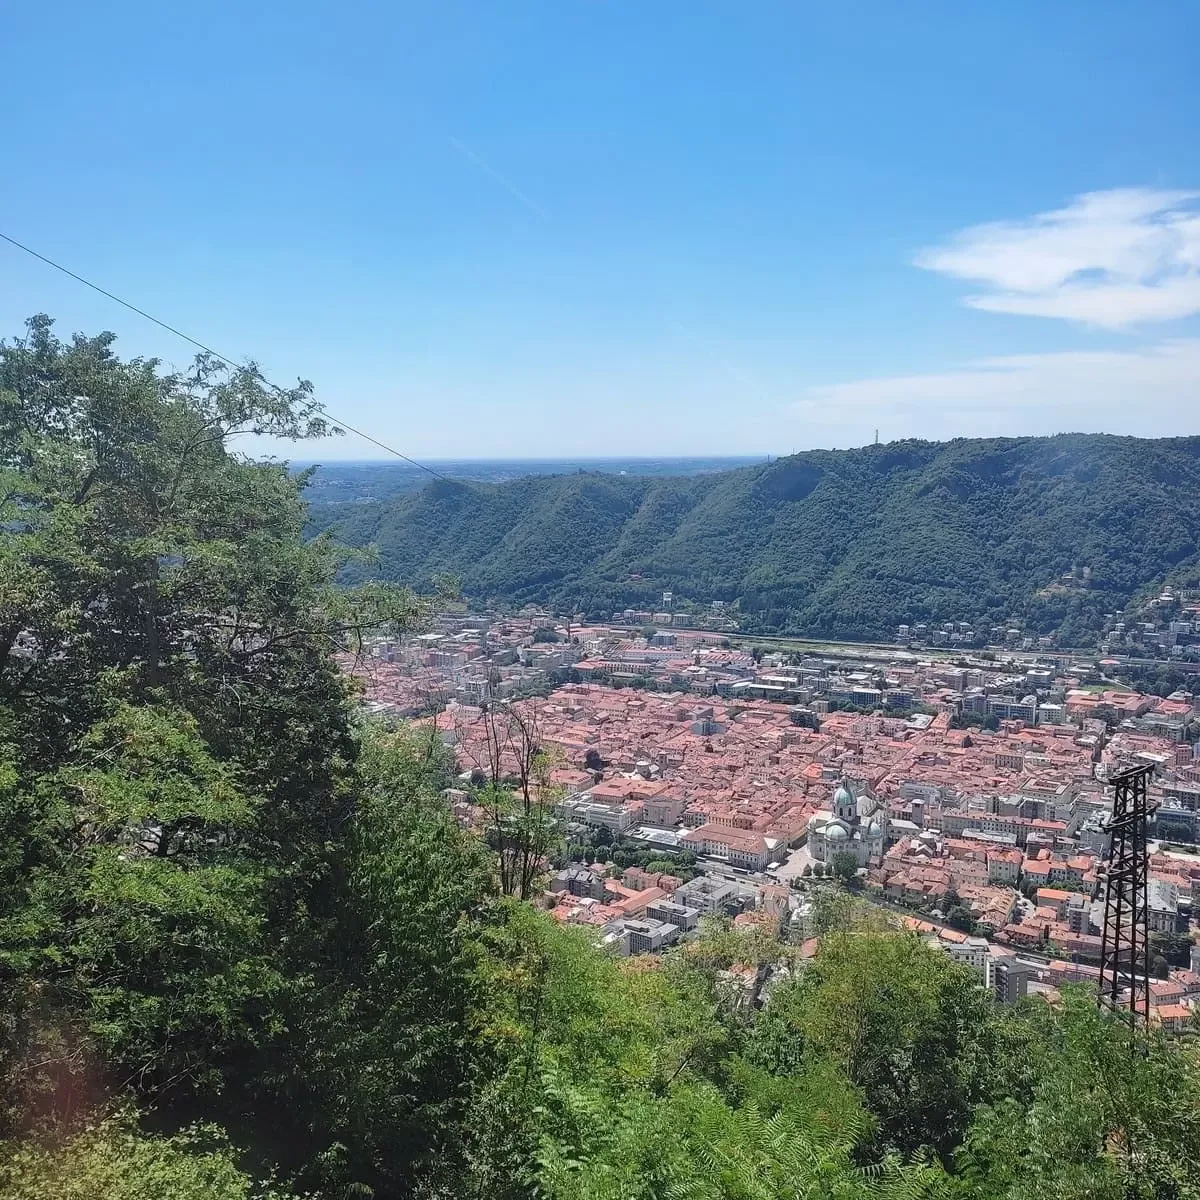 From the furnicular to Brunate you have a great view over the red roofs of Como Town